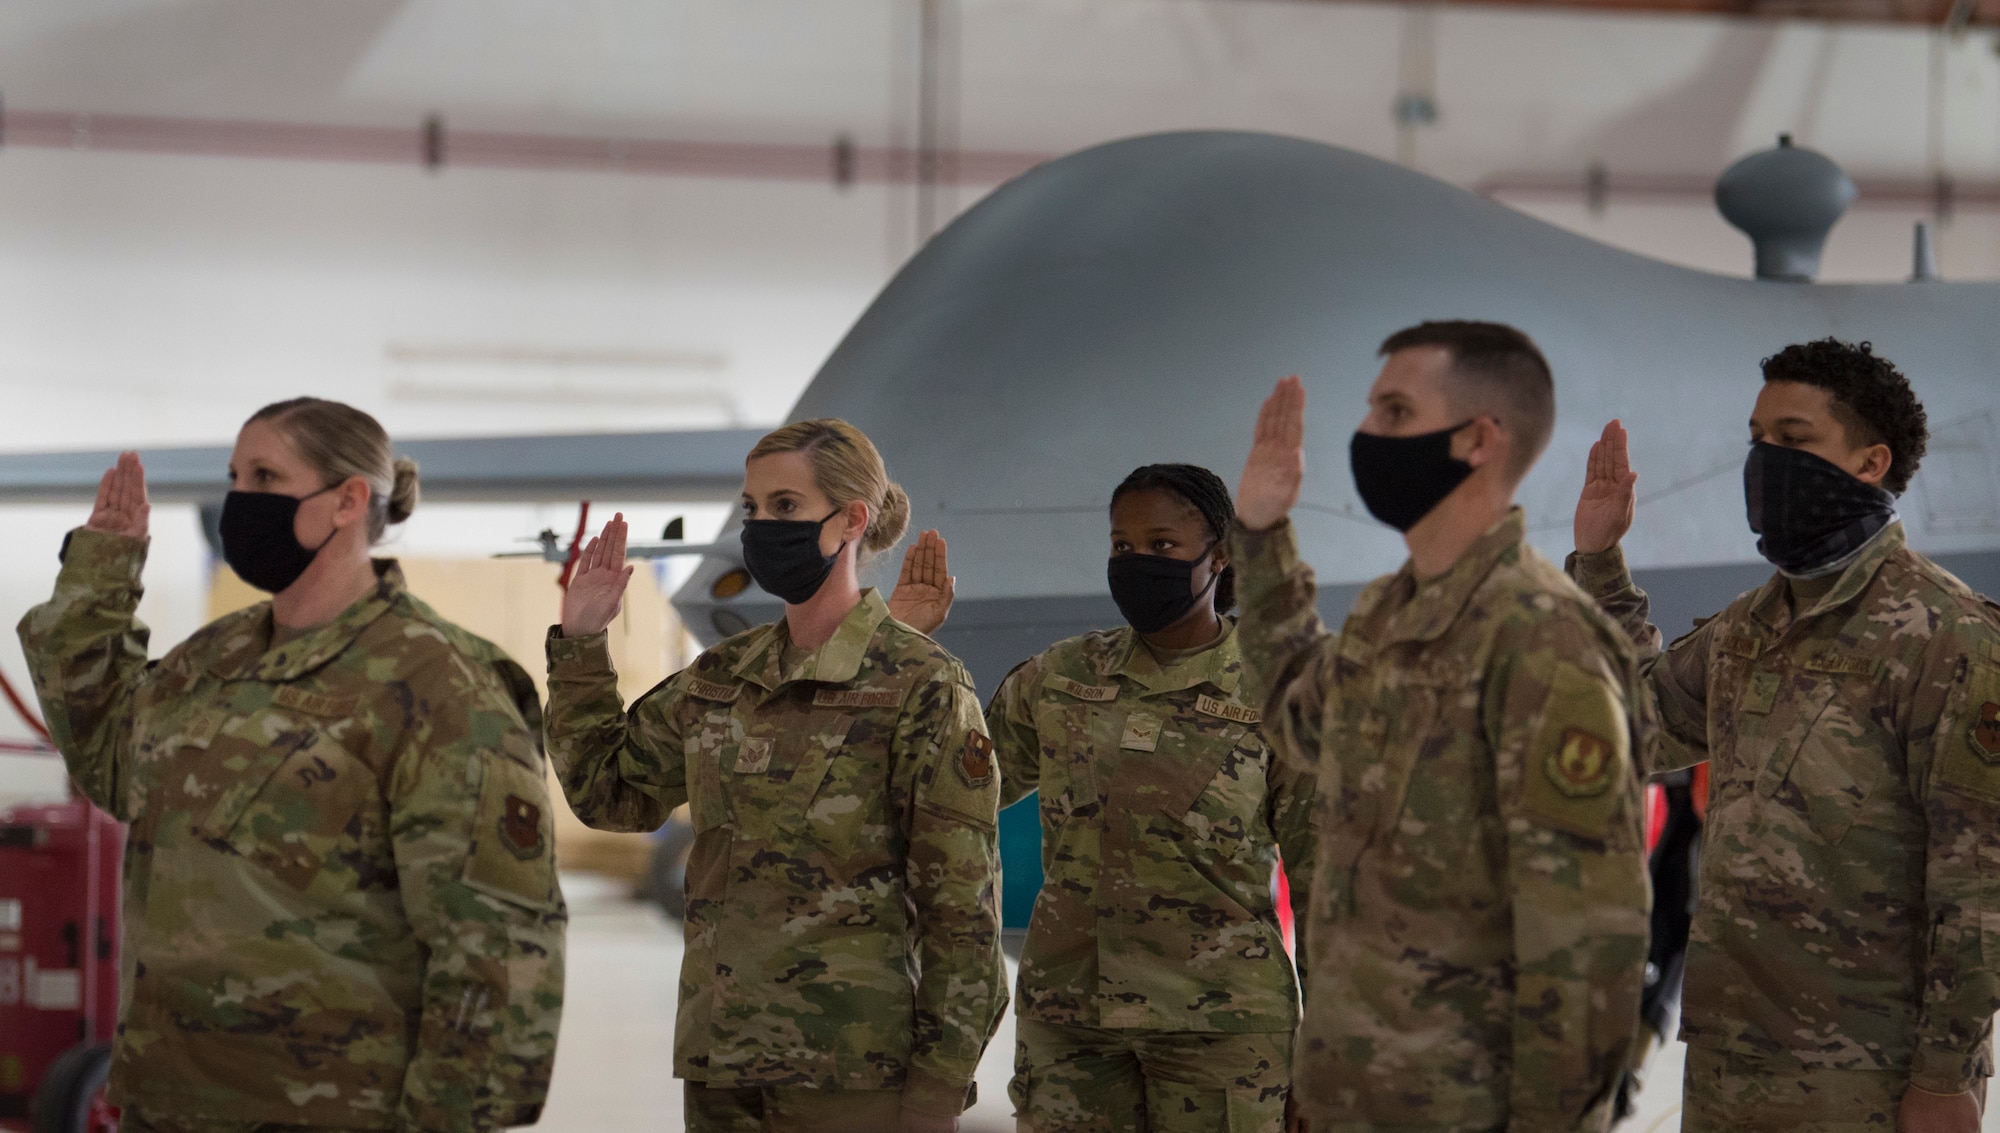 Holloman Air Force Base and Fort Bliss, Texas, Airmen take the Oath of Enlistment during U.S. Space Force transfer ceremony, Feb. 12, 2021, on Holloman Air Force Base, New Mexico. A total of 19 Airmen were chosen to transfer over to the U.S. Space Force. (U.S. Air Force photo by Airman 1st Class Jessica Sanchez)